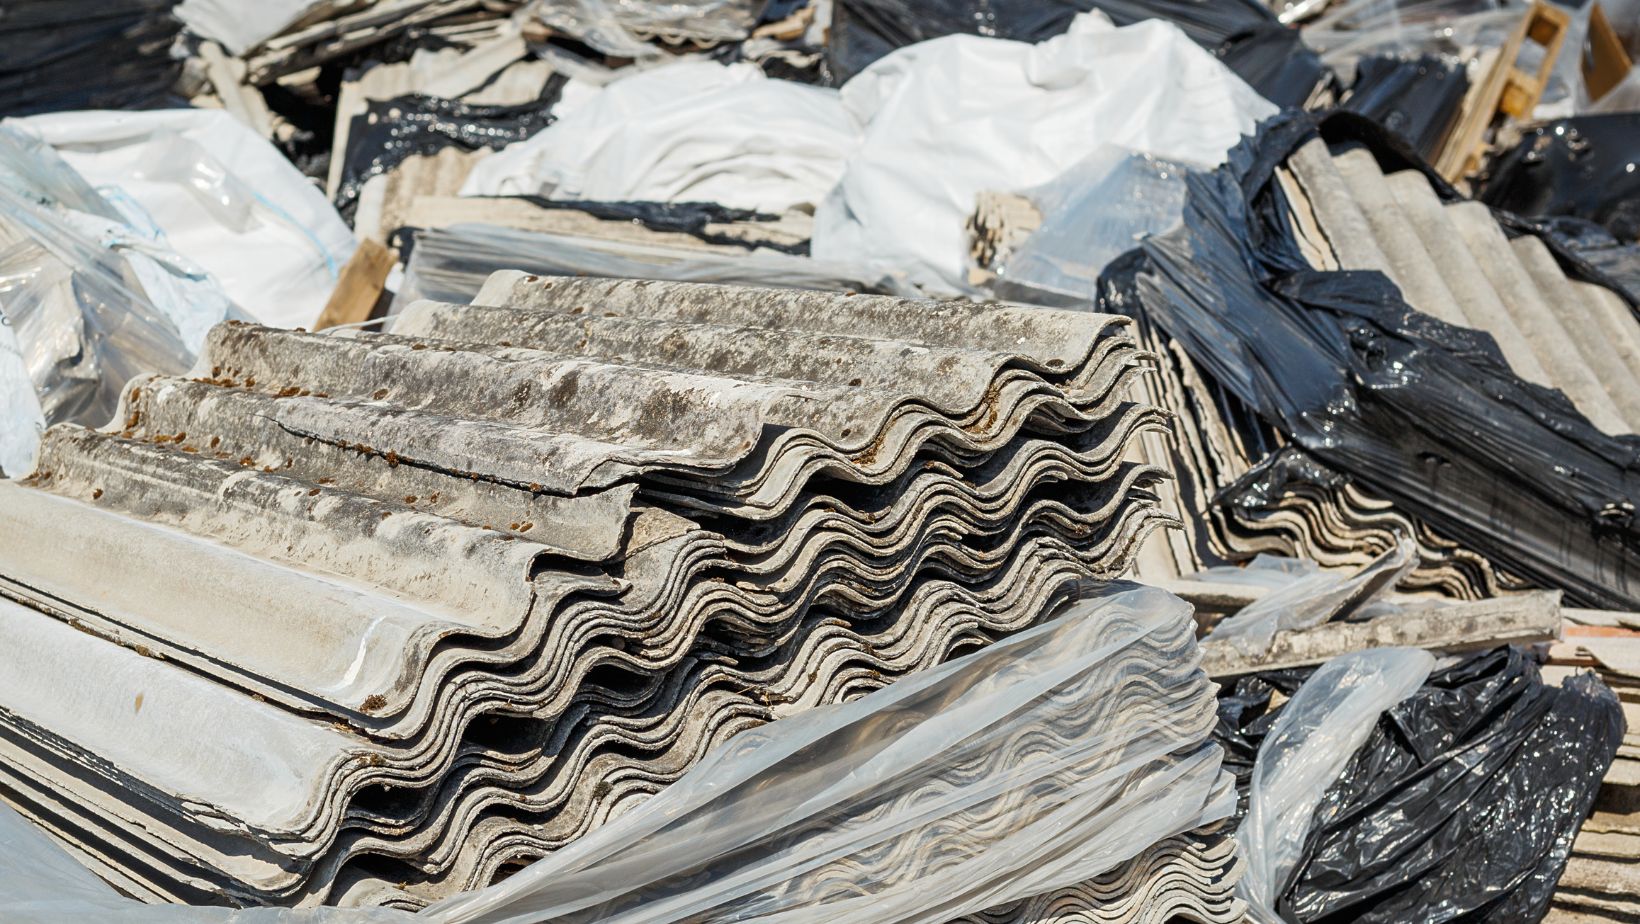 How Asbestos Exposure Can Lead to Various Health Risks